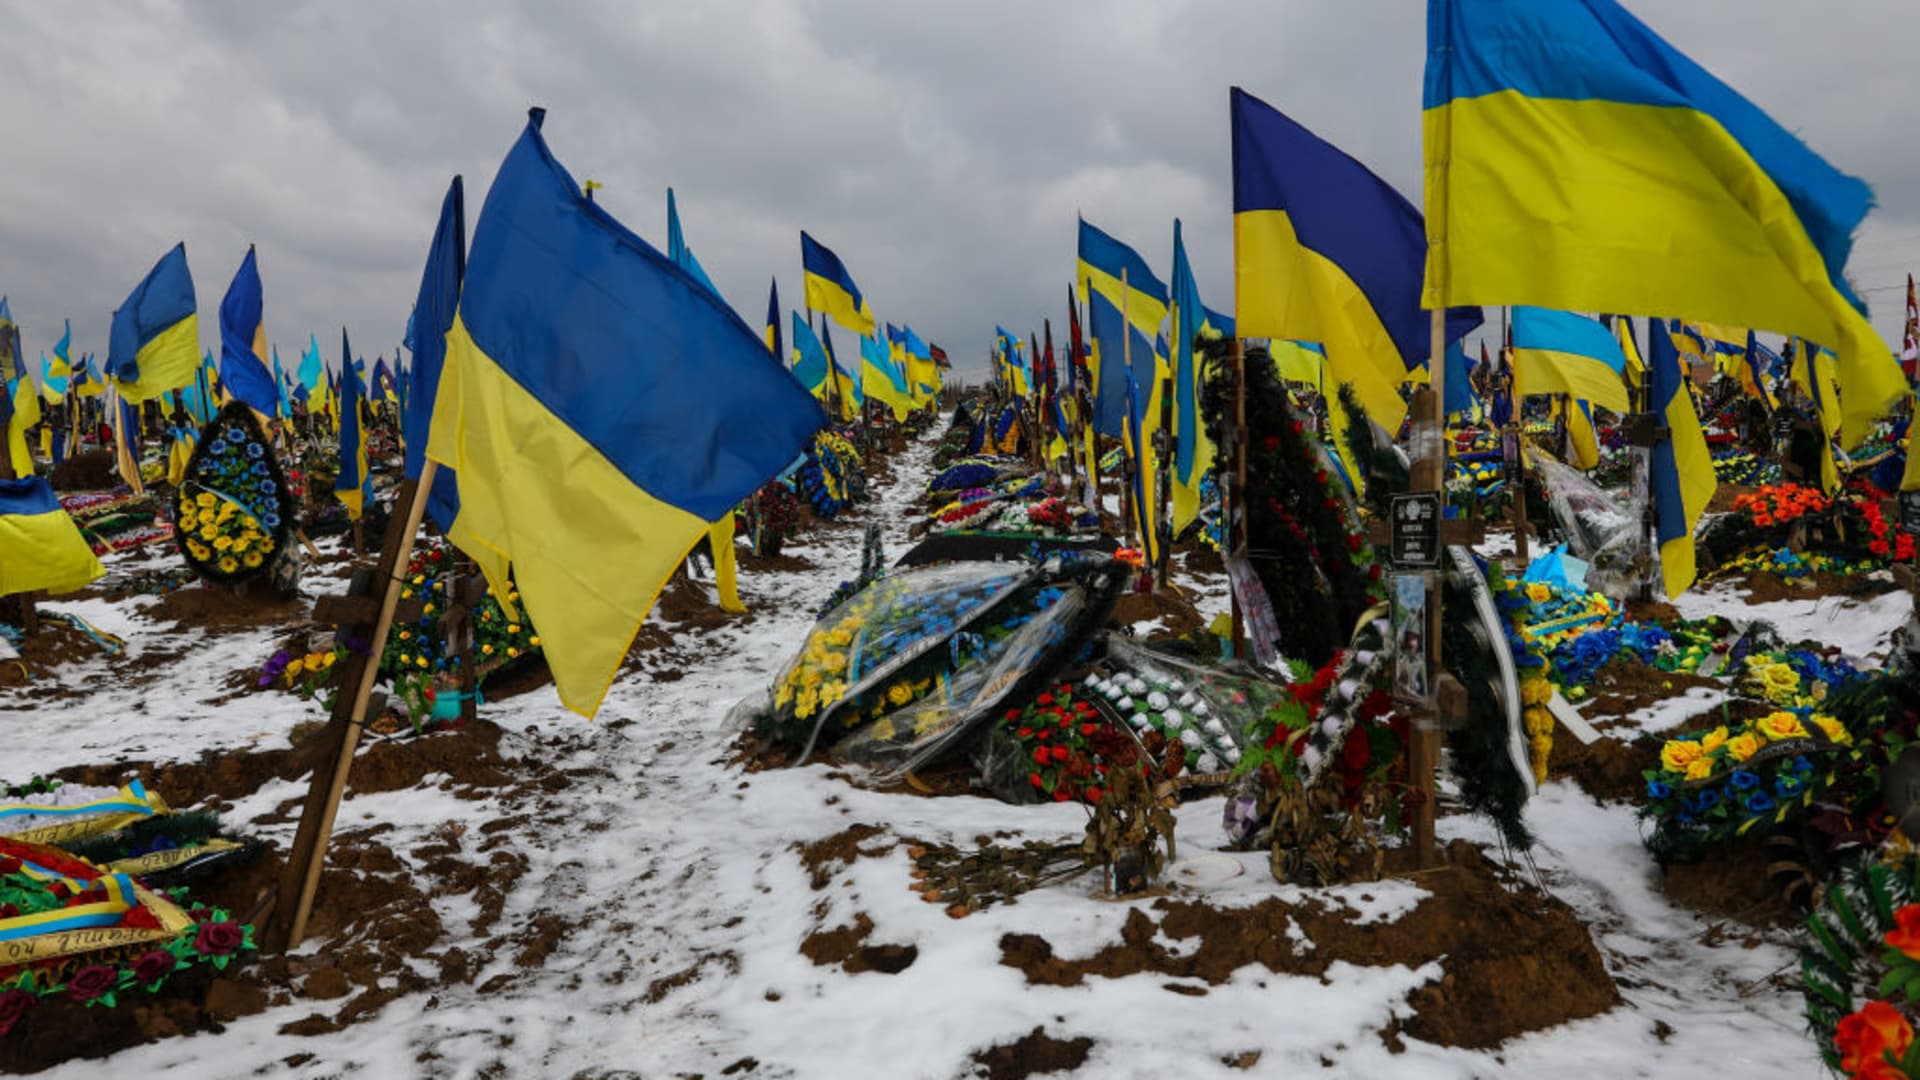 A view of the graveyard where fallen Ukrainian soldiers are buried, including Gennady Kovshyk, a soldier of the 92nd Separate Mechanized Brigade, in Kharkiv, Ukraine, on Feb. 16, 2023.